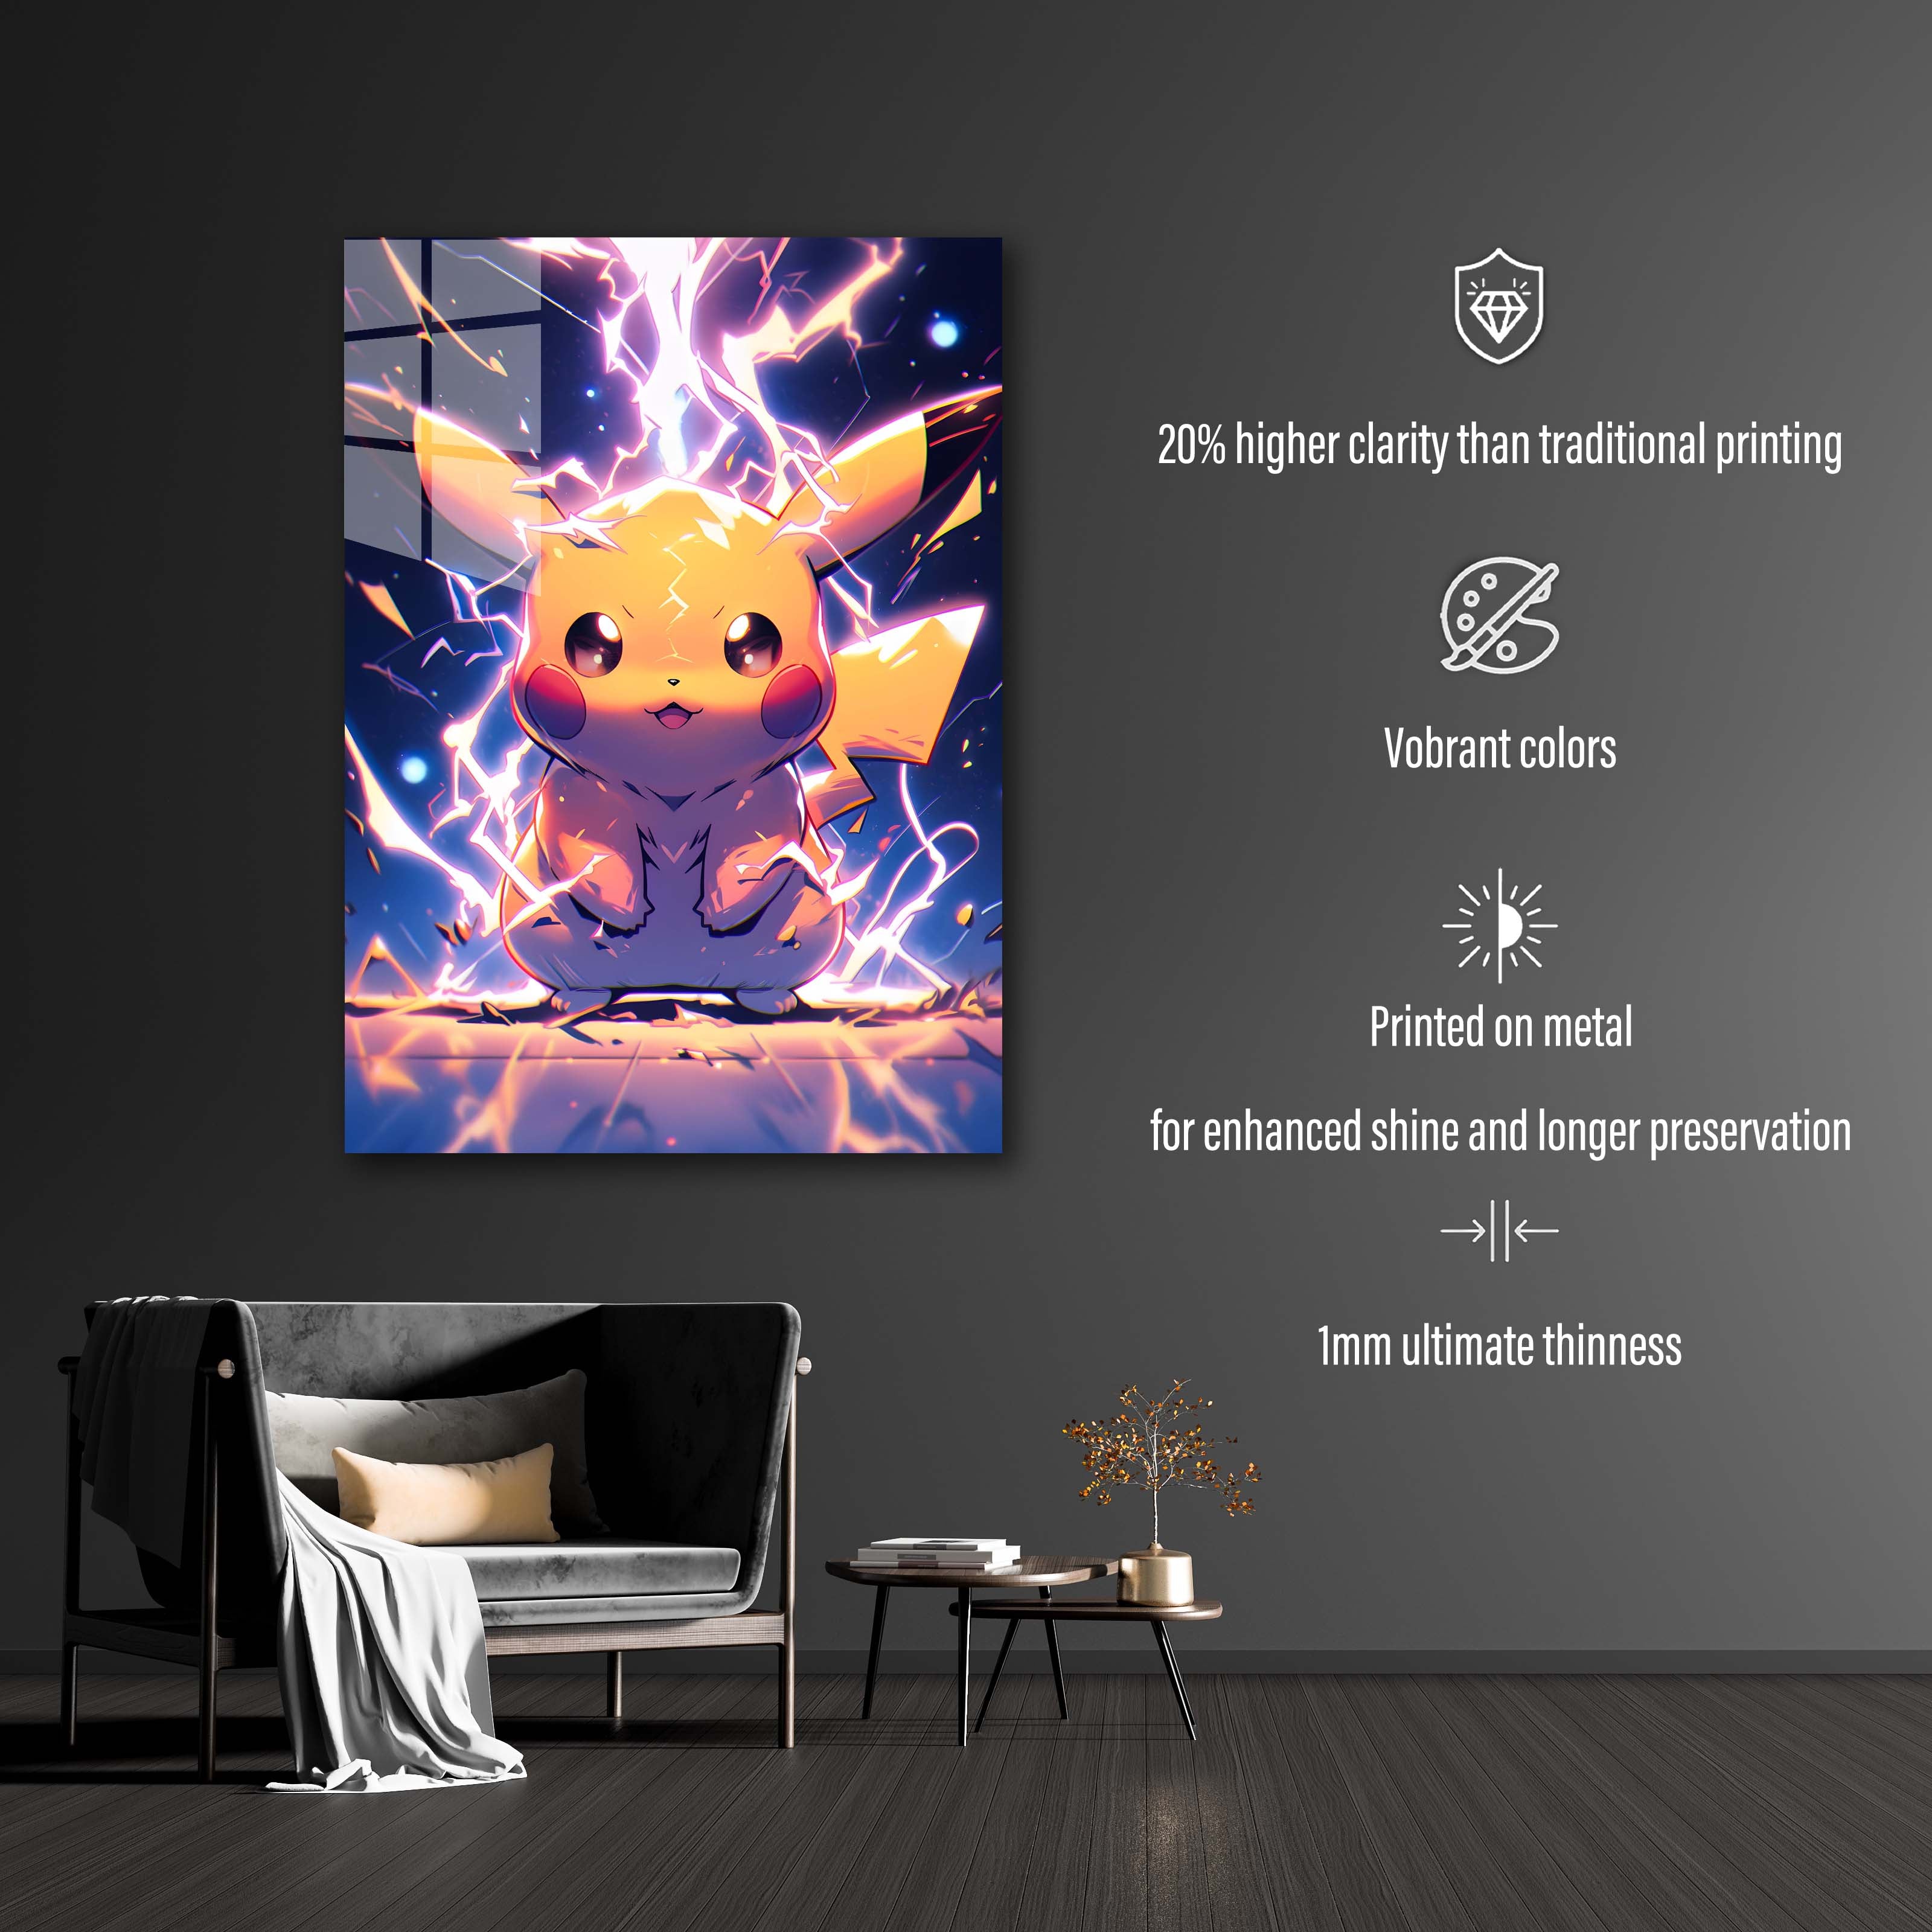 Powerful Pikachu-designed by-designed by @By_Monkai